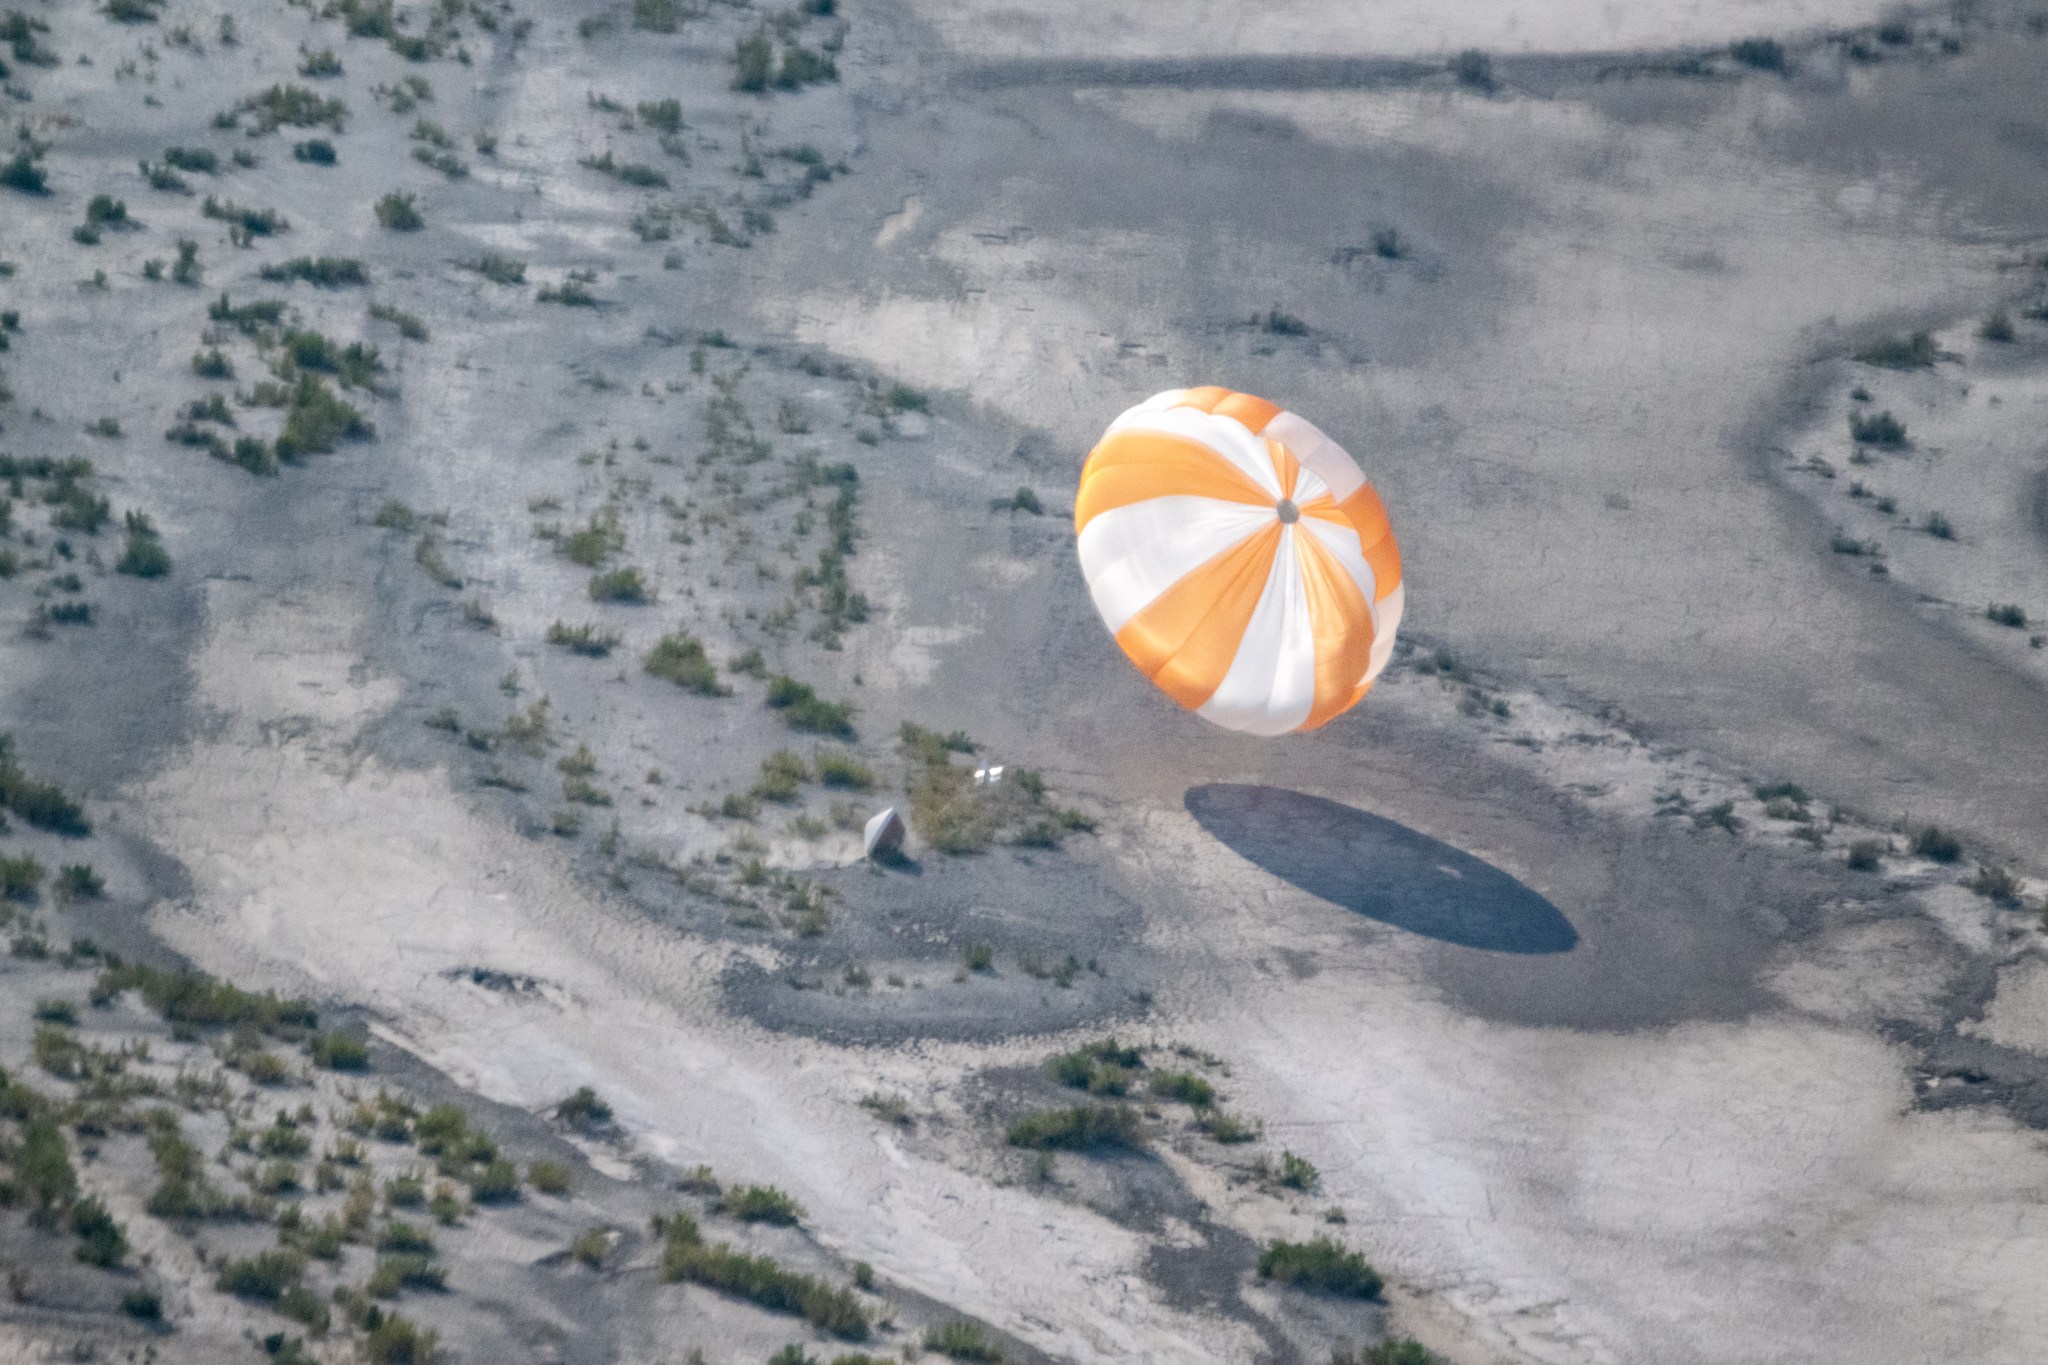 The mission’s sample return capsule will land with aid of a parachute – like the training model shown here in an Aug. 30 test – on Sept. 24 at the Department of Defense's Utah Test and Training Range in the desert outside Salt Lake City.